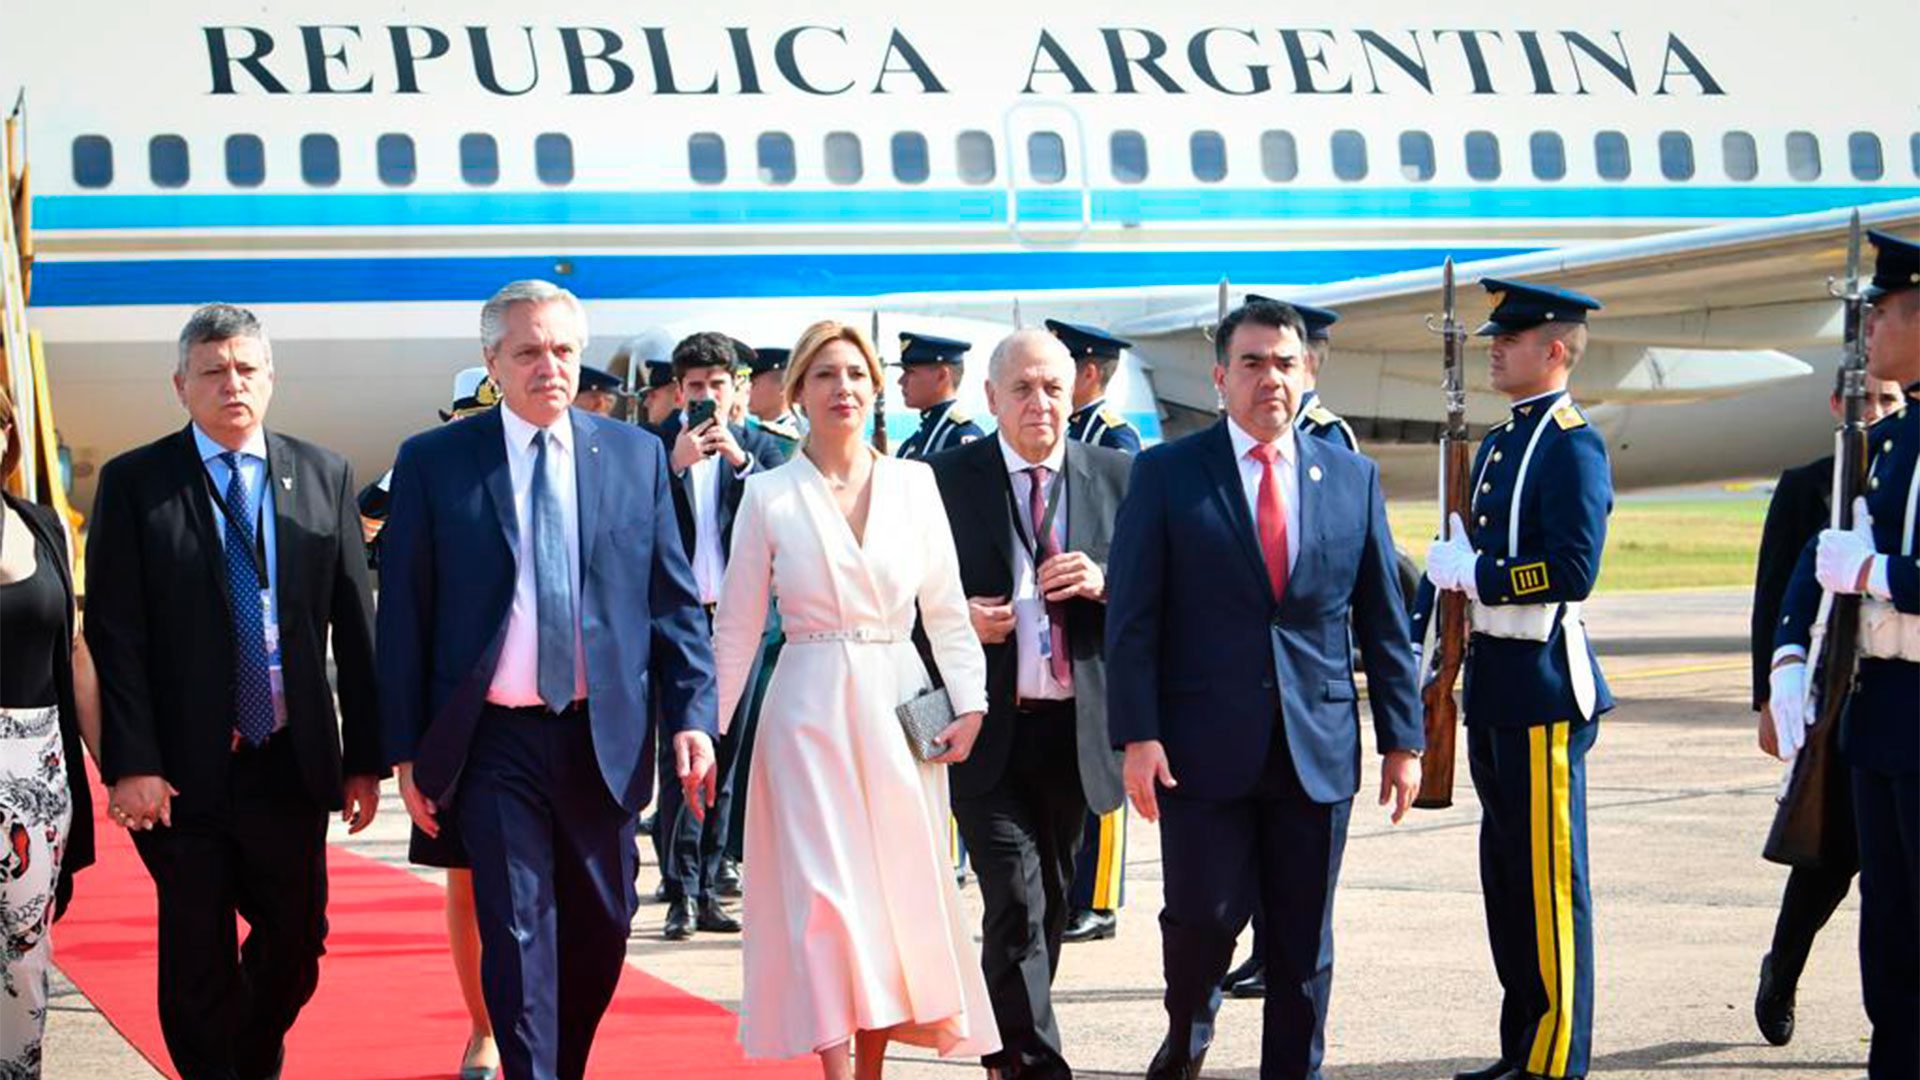 Alberto Fernandez with Fabiola Yanez upon his arrival in Asuncion to participate in the Mercosur Summit